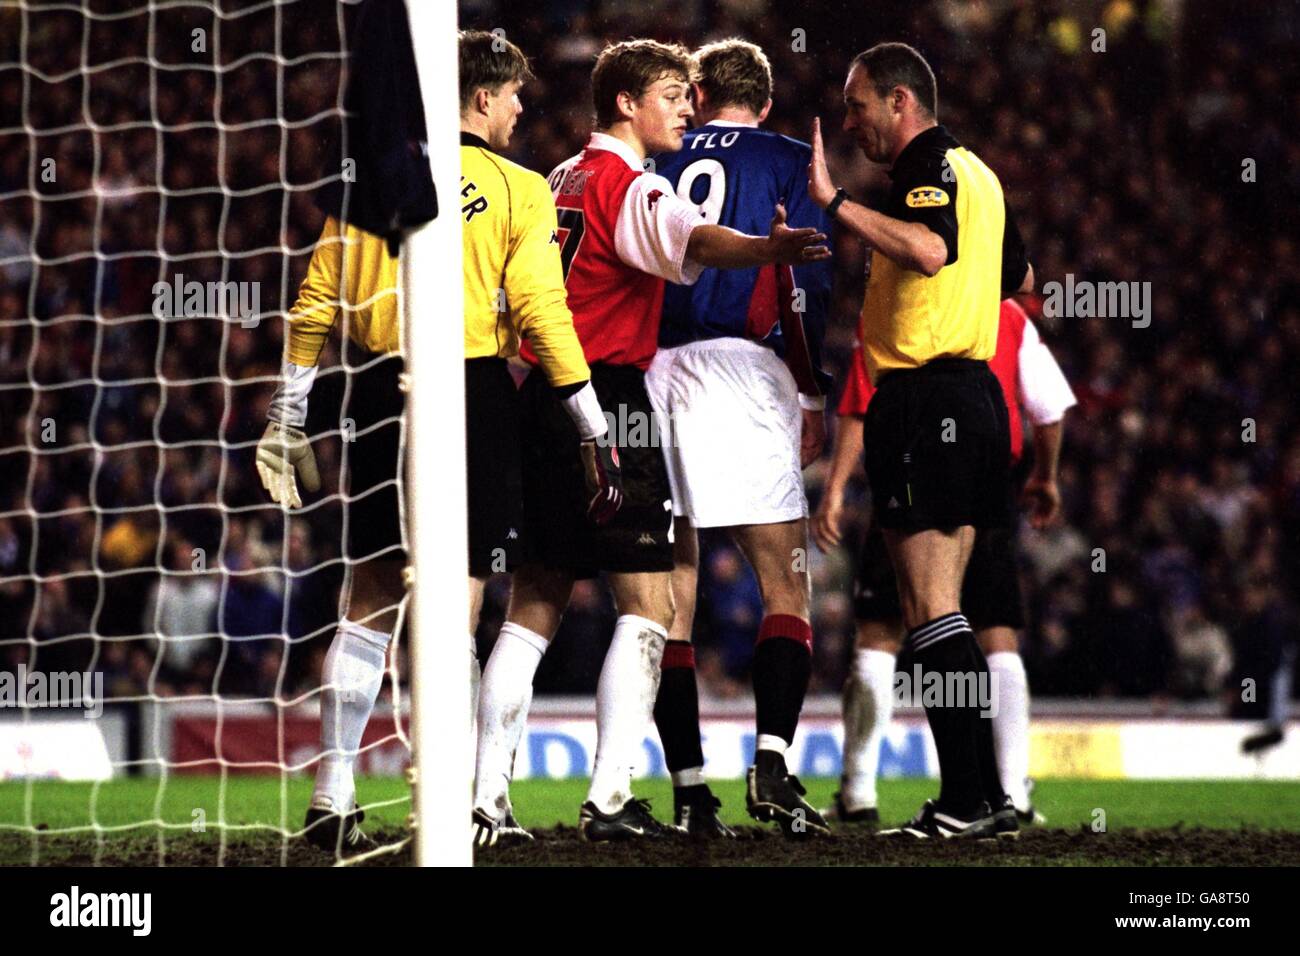 Soccer - UEFA Cup - Fourth Round - First Leg - Rangers v Feyenoord. L-R: Feyenoord's goalkeeper Edwin Zoetebier, Glenn Loovens and Rangers Tore Andre Flo argue with referee Eric Poulat Stock Photo